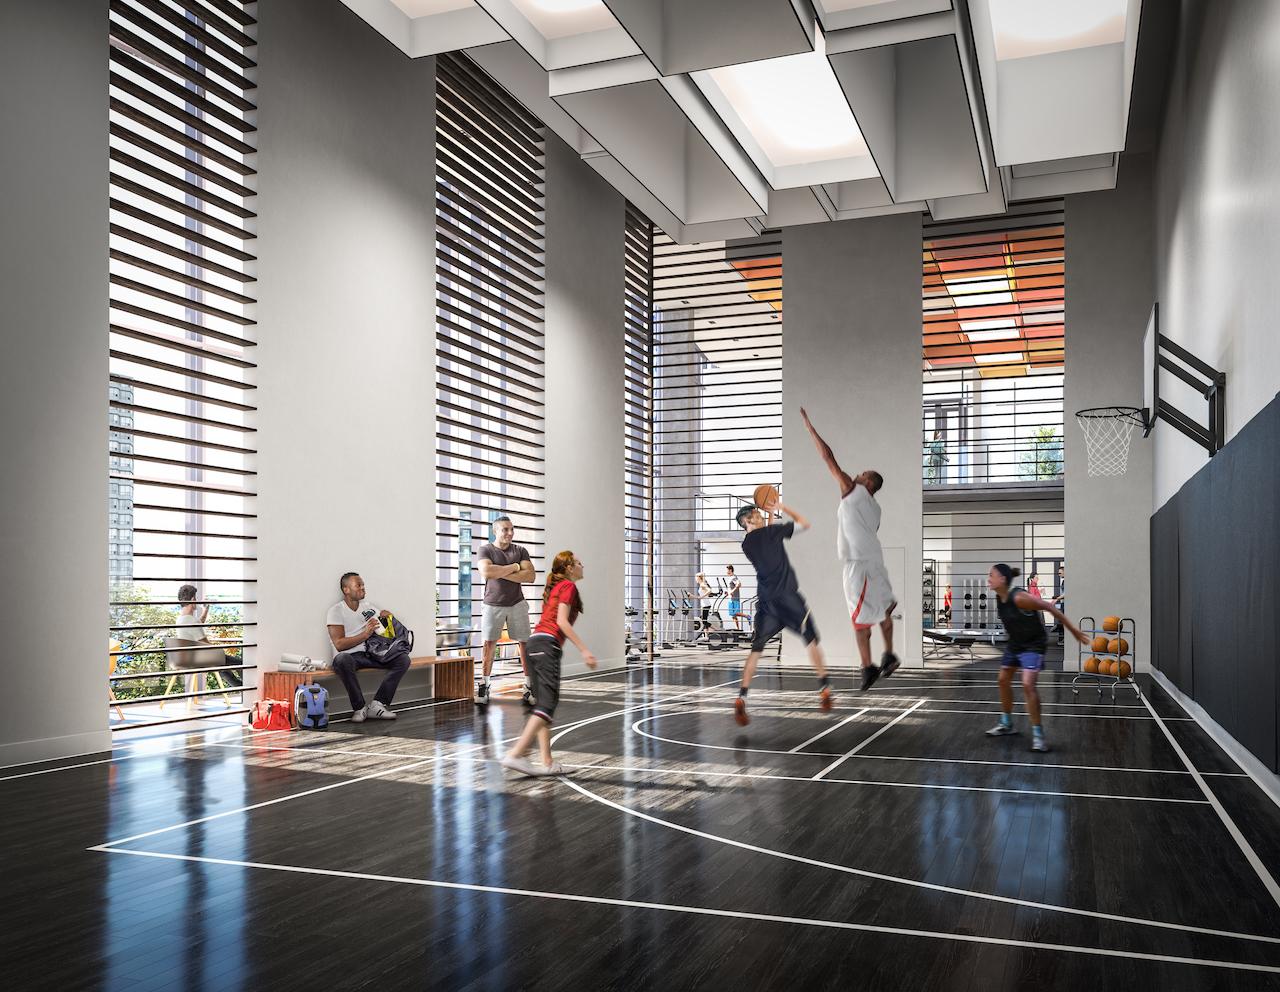 Interior rendering of Wesley Tower's gym / fitness centre.